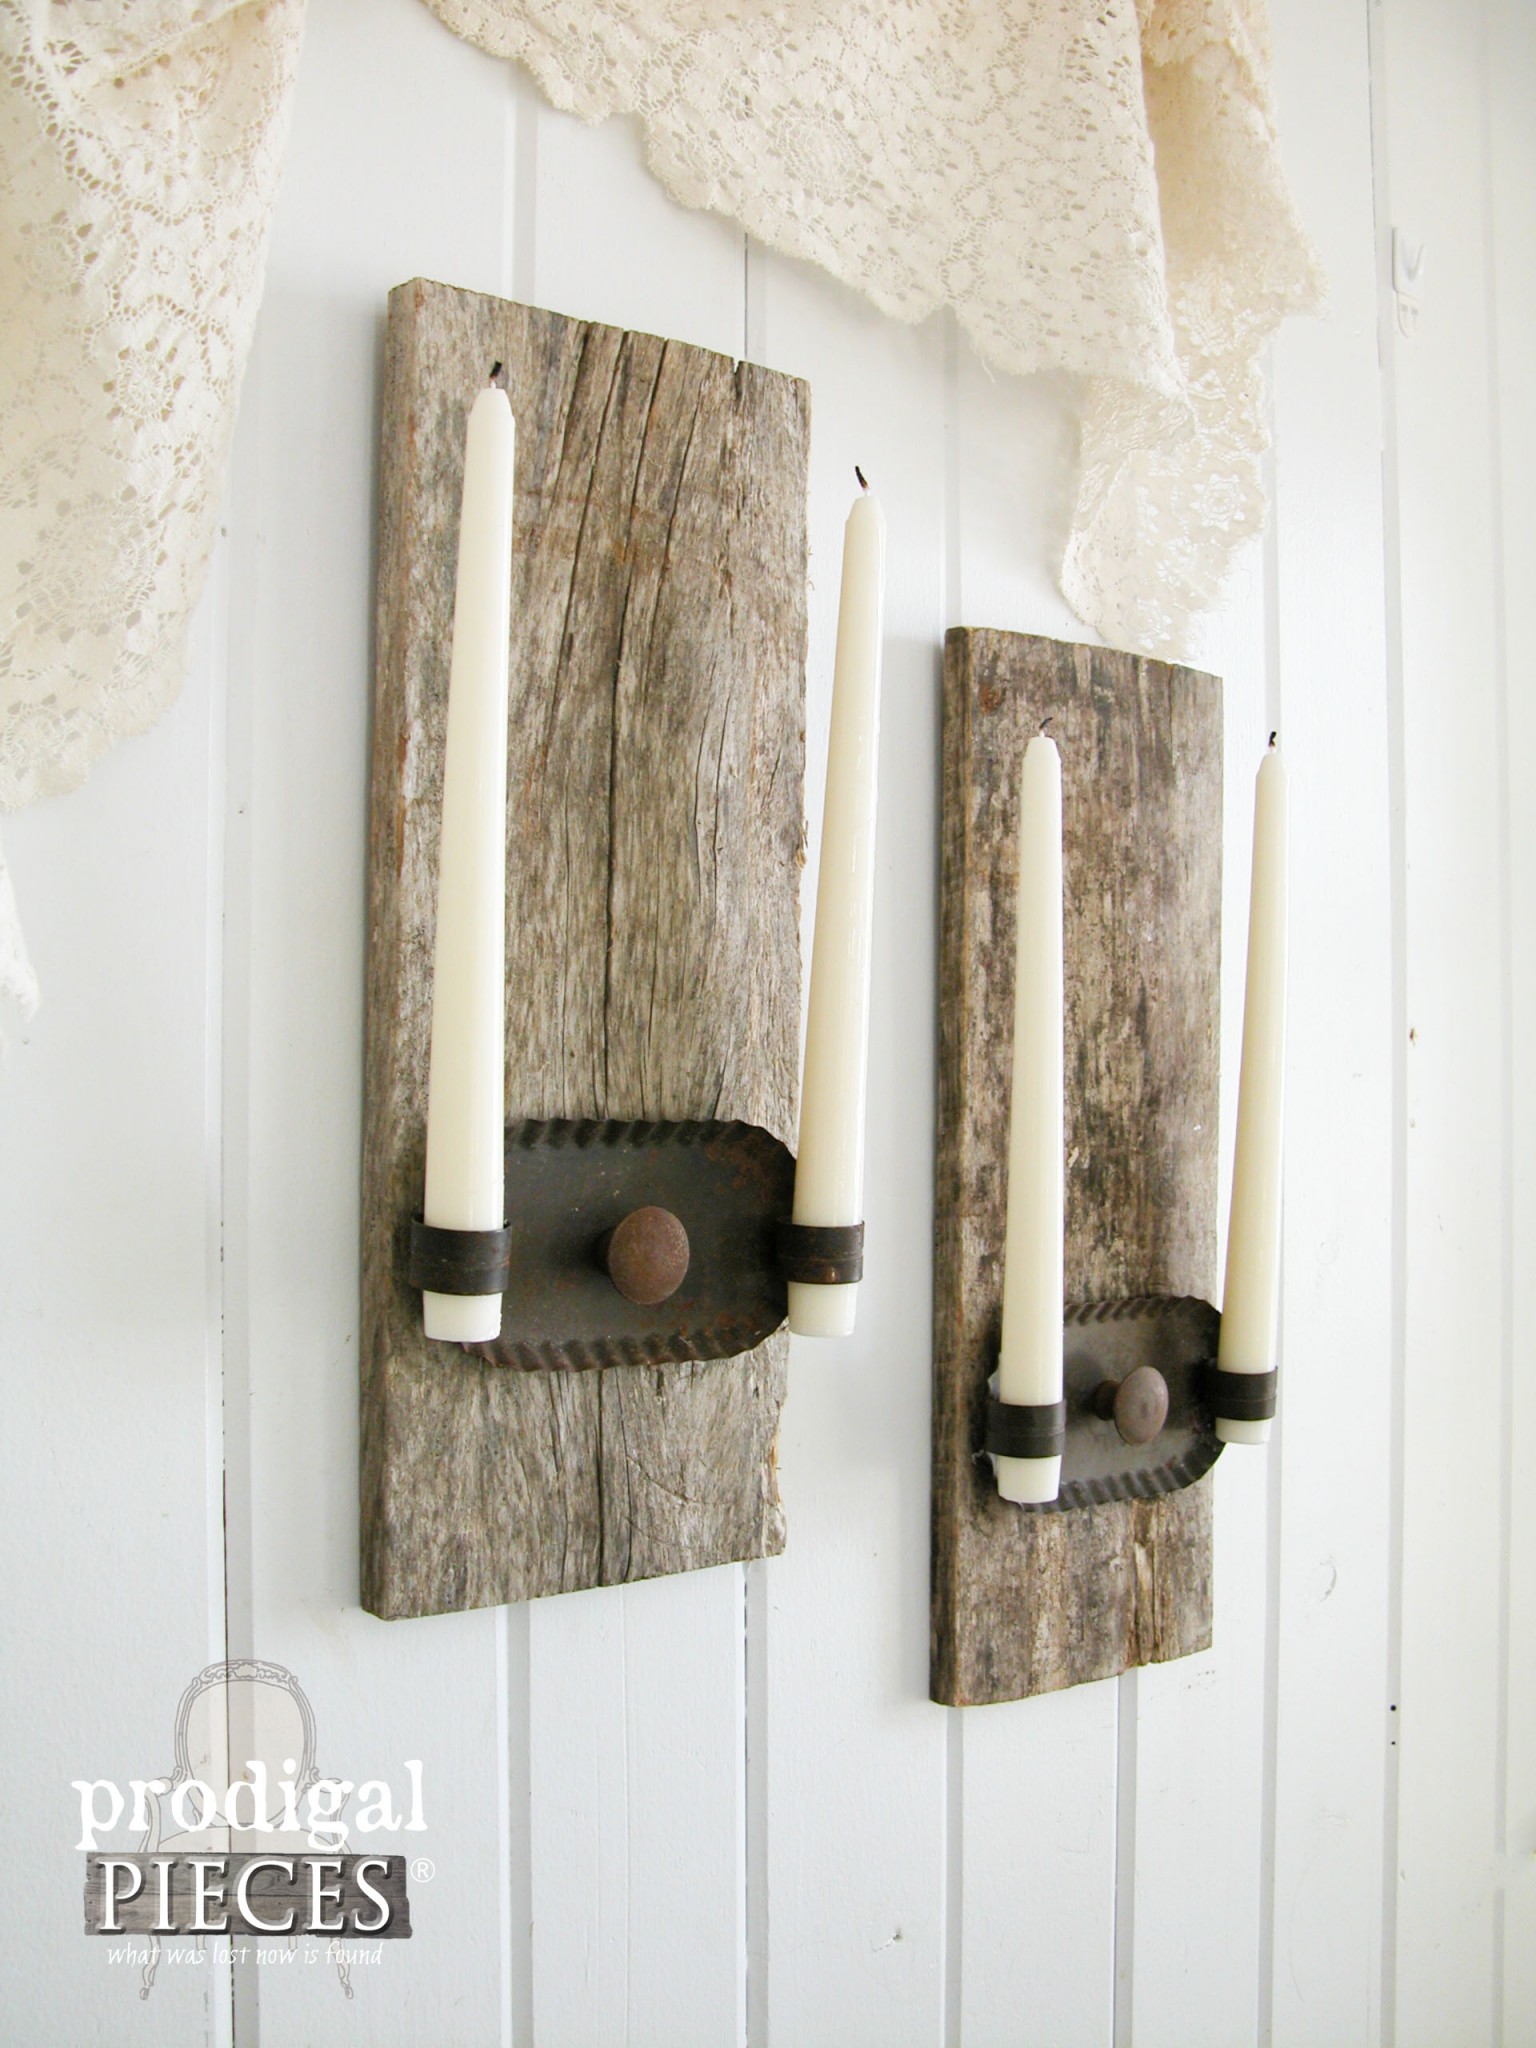 Rustic Reclaimed Candle Sconces from Barn Wood and Junk by Prodigal Pieces | www.prodigalpieces.com